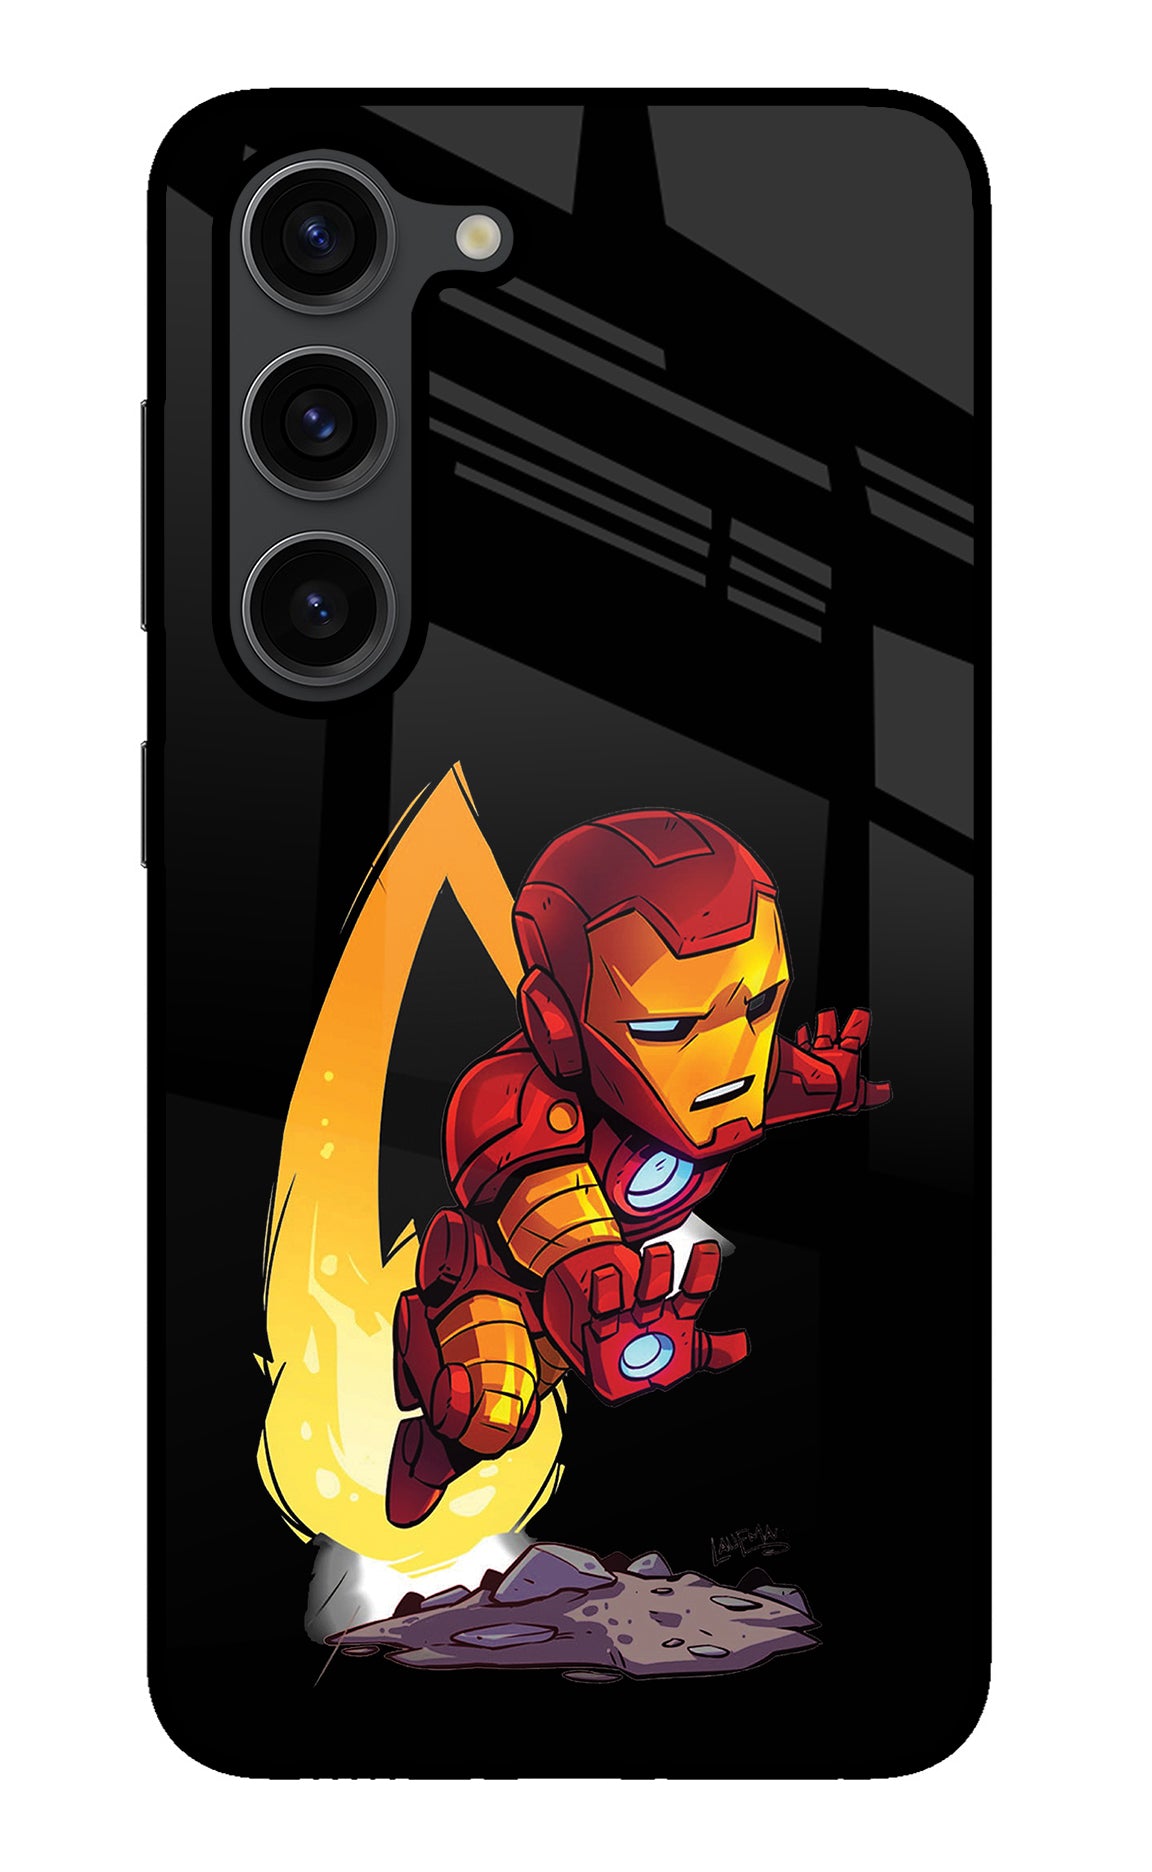 IronMan Samsung S23 Plus Back Cover